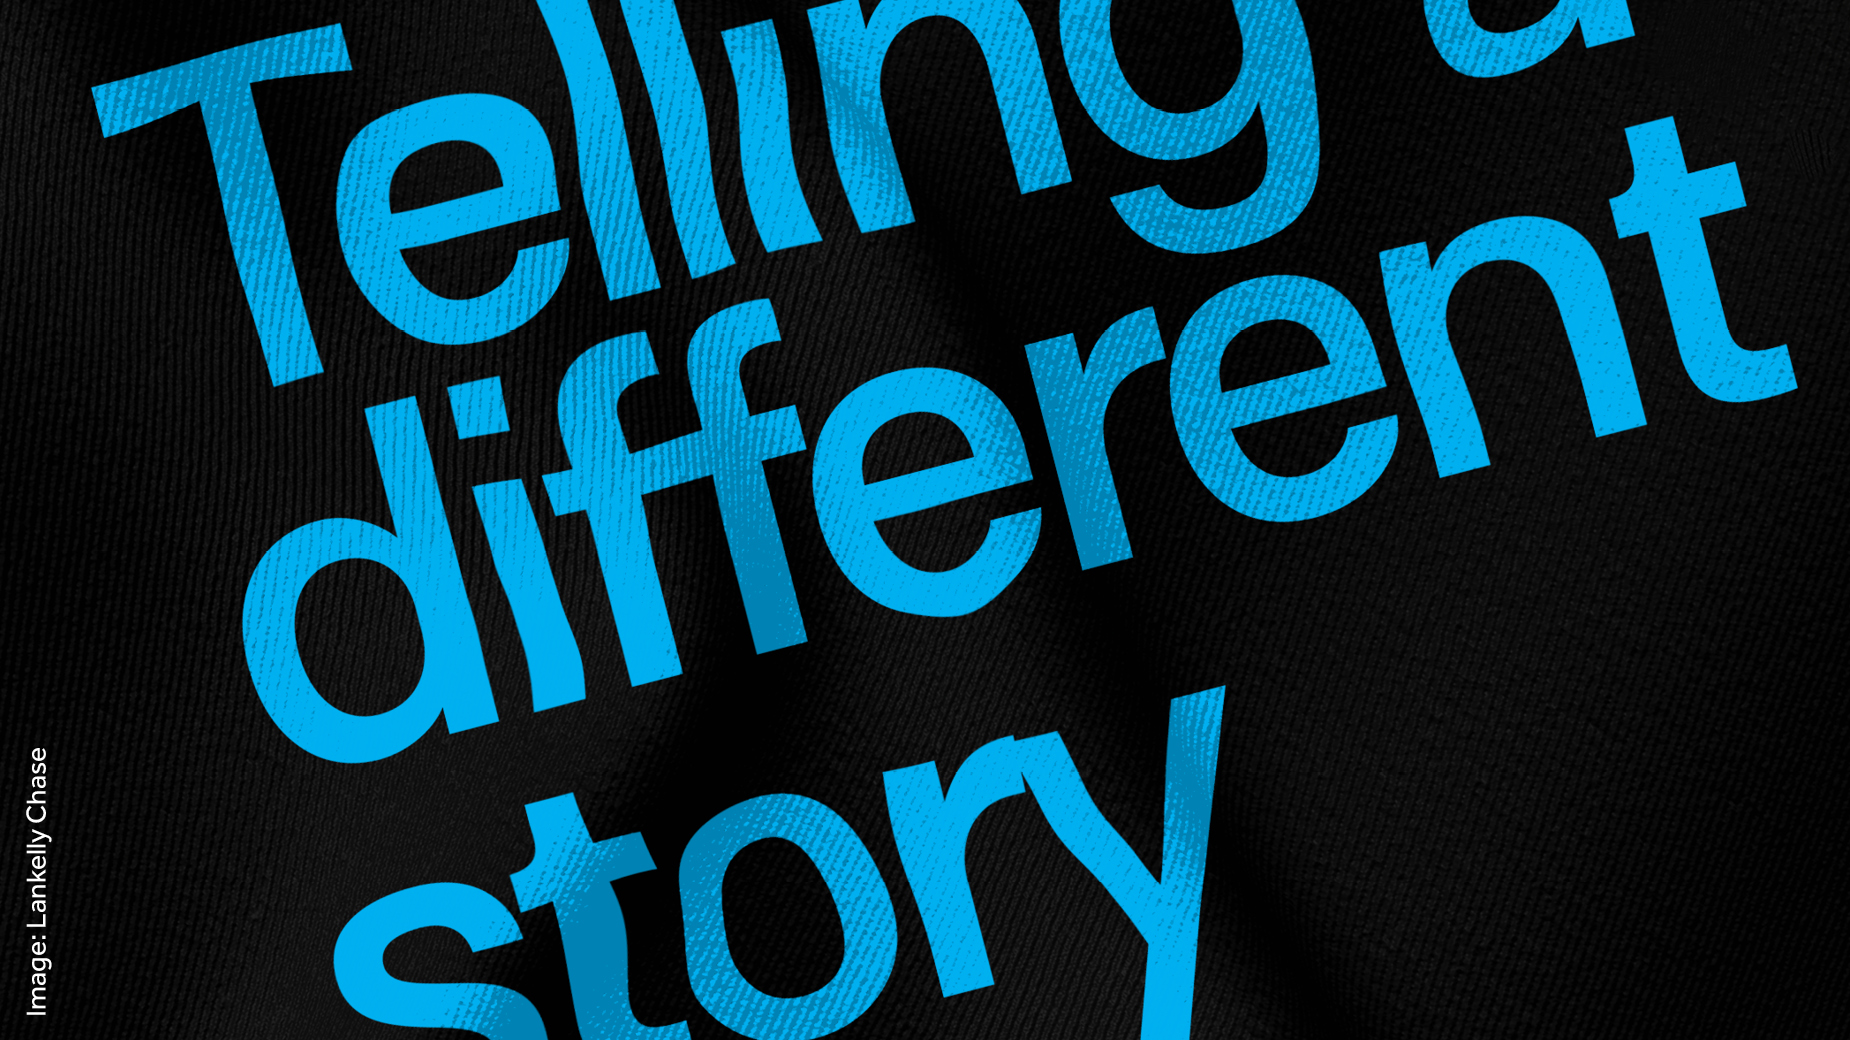 Blue font on a black background spelling out Telling a different story